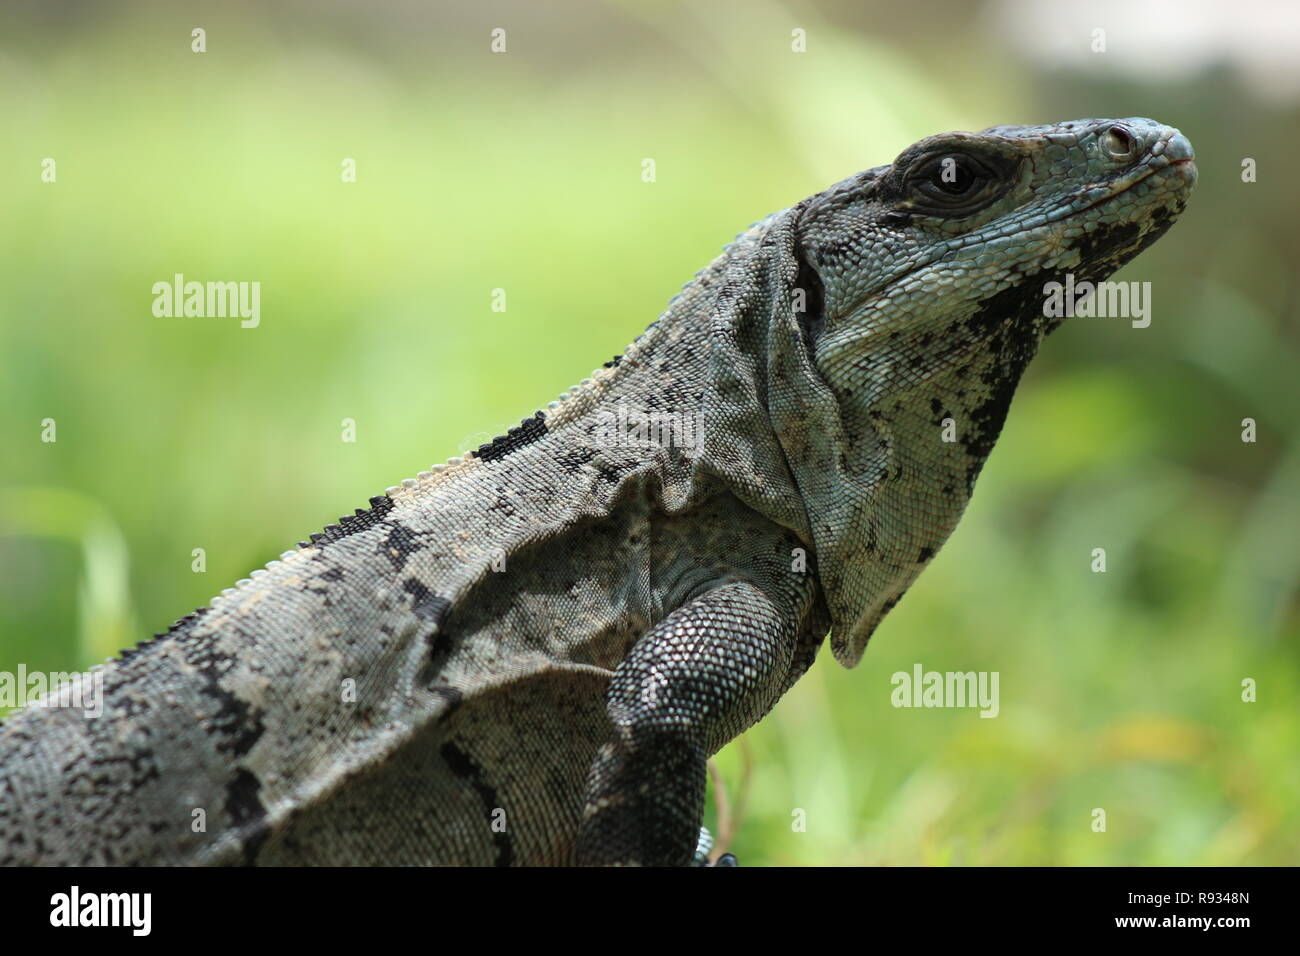 Close up of a resting lizard against a soft-focus green background, Chichen Itza, Mexico, Central America Stock Photo